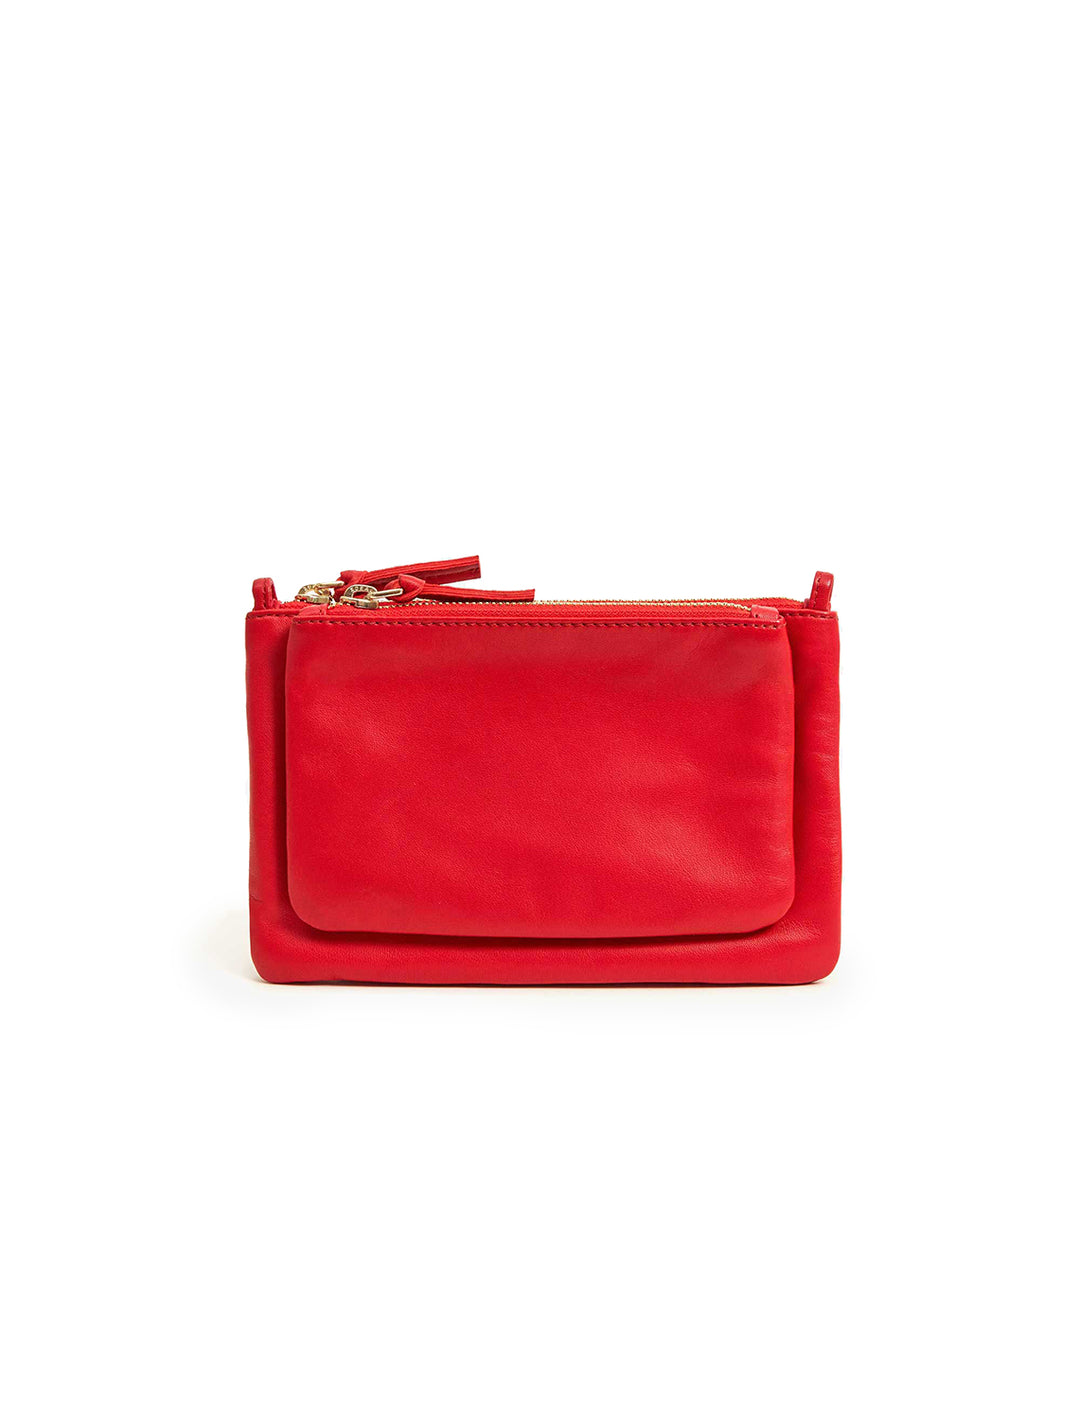 Front view of Clare V.'s wallet clutch plus in rouge.